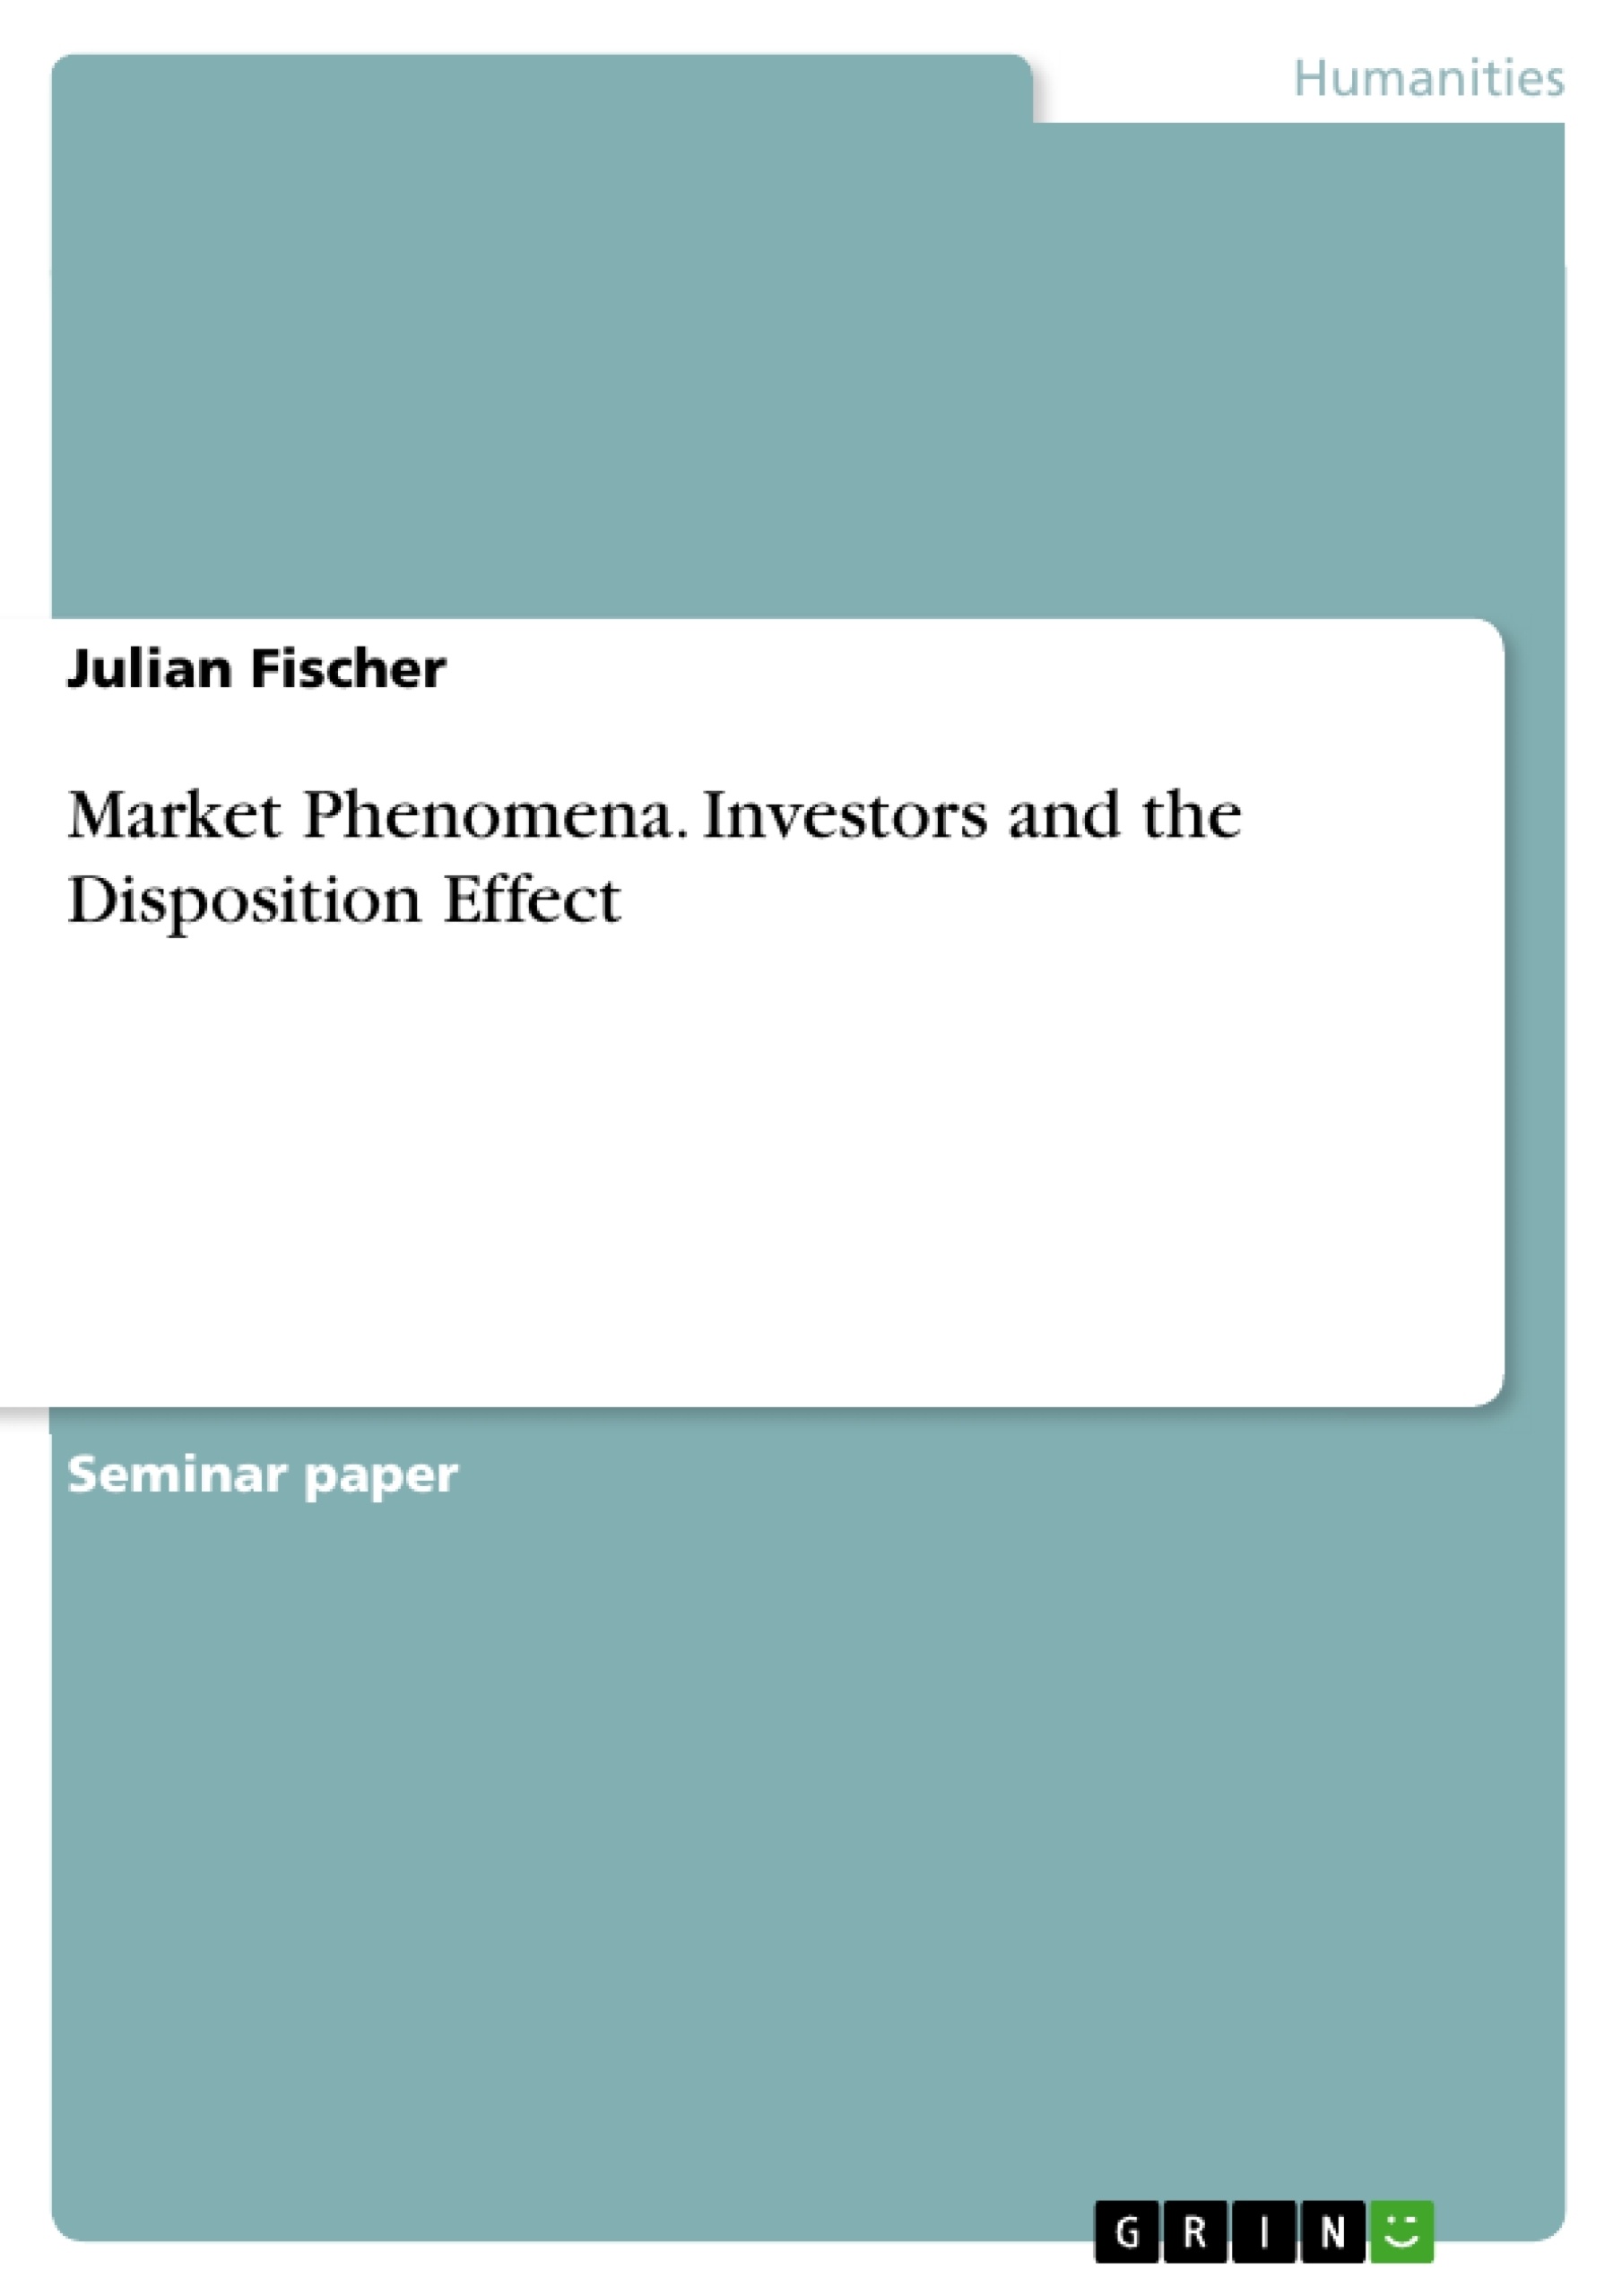 Título: Market Phenomena. Investors and the Disposition Effect